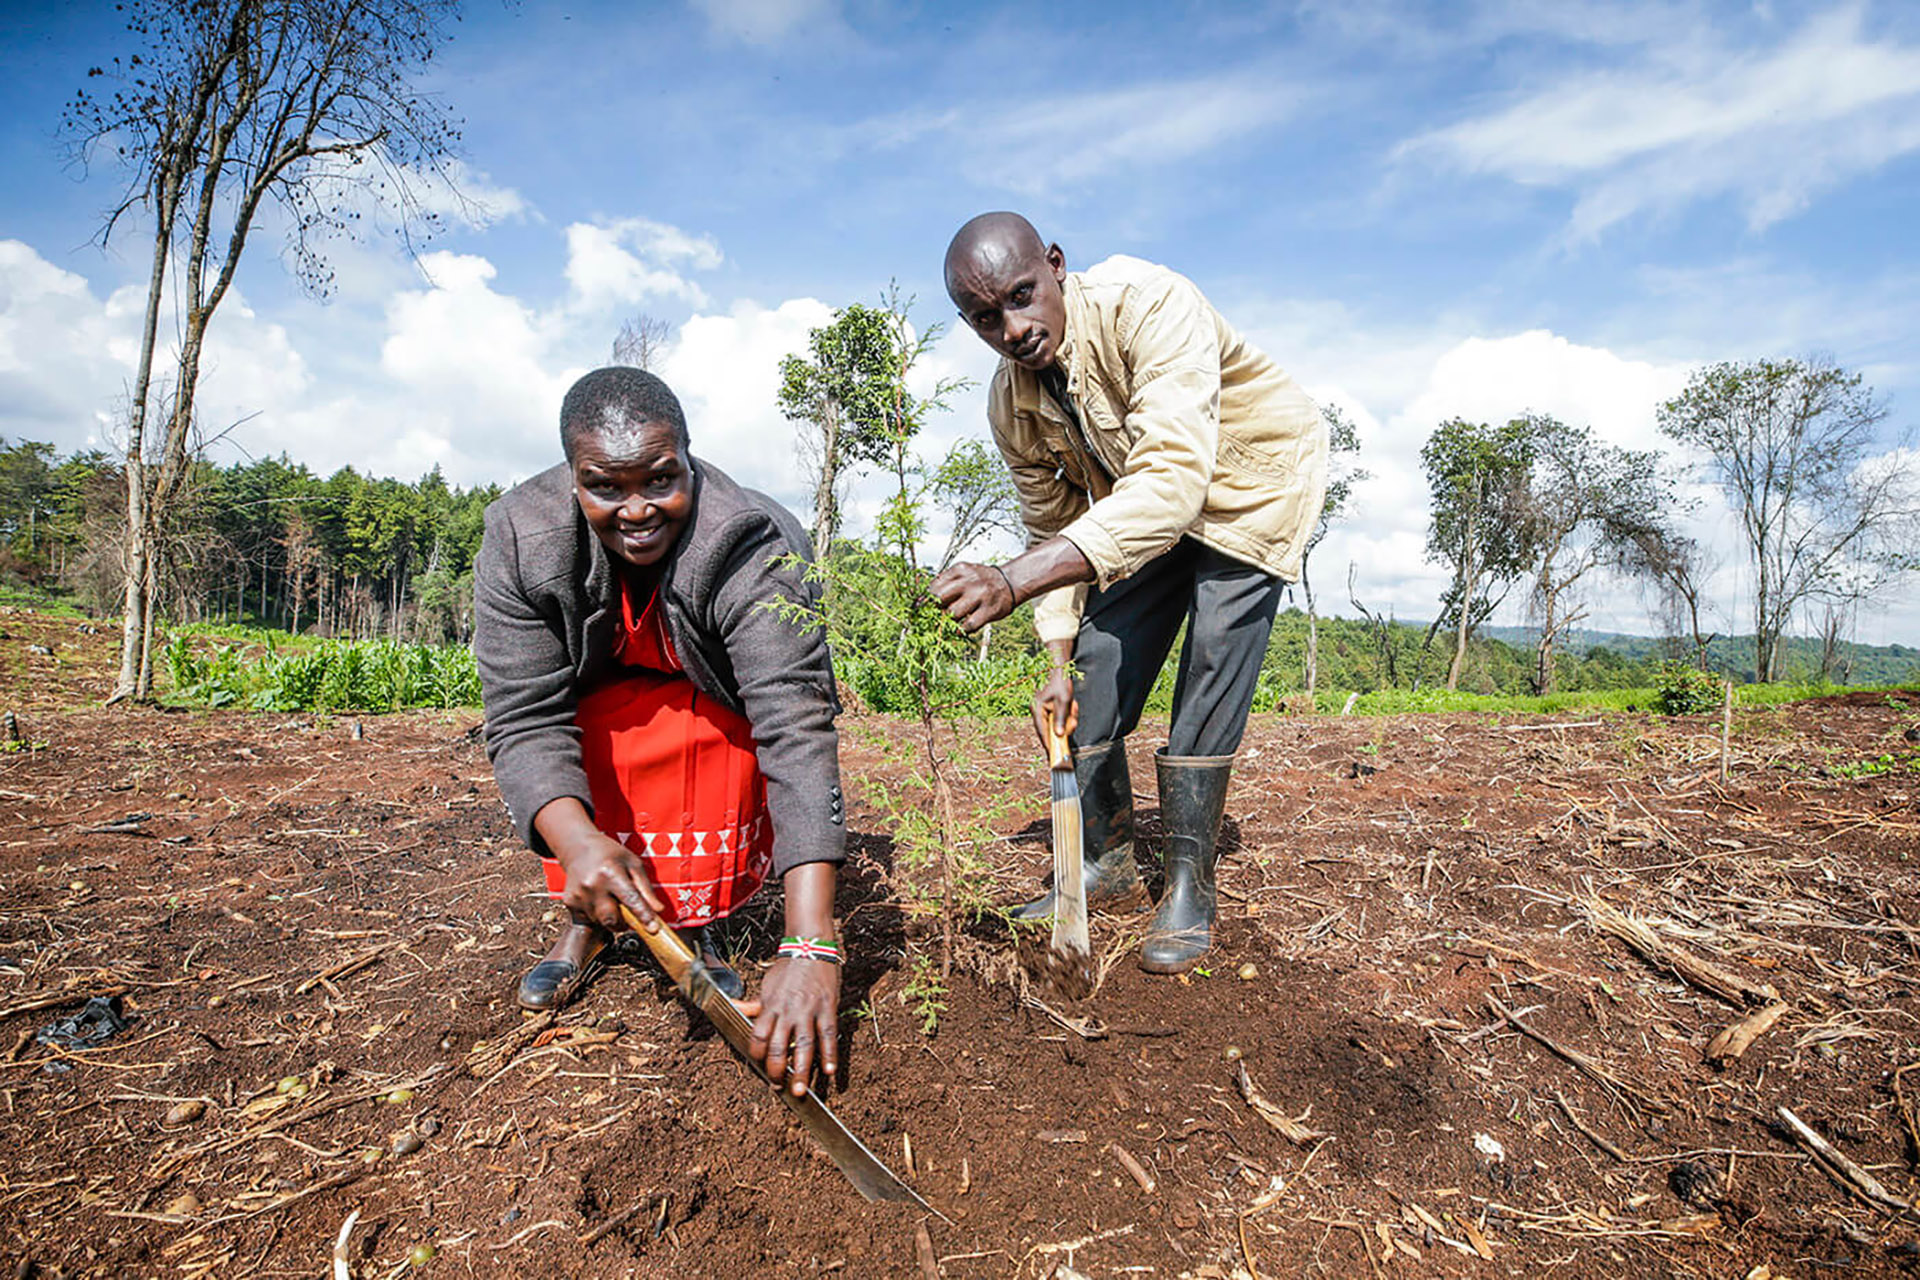  Kenya: Managing Forests through Community Participation